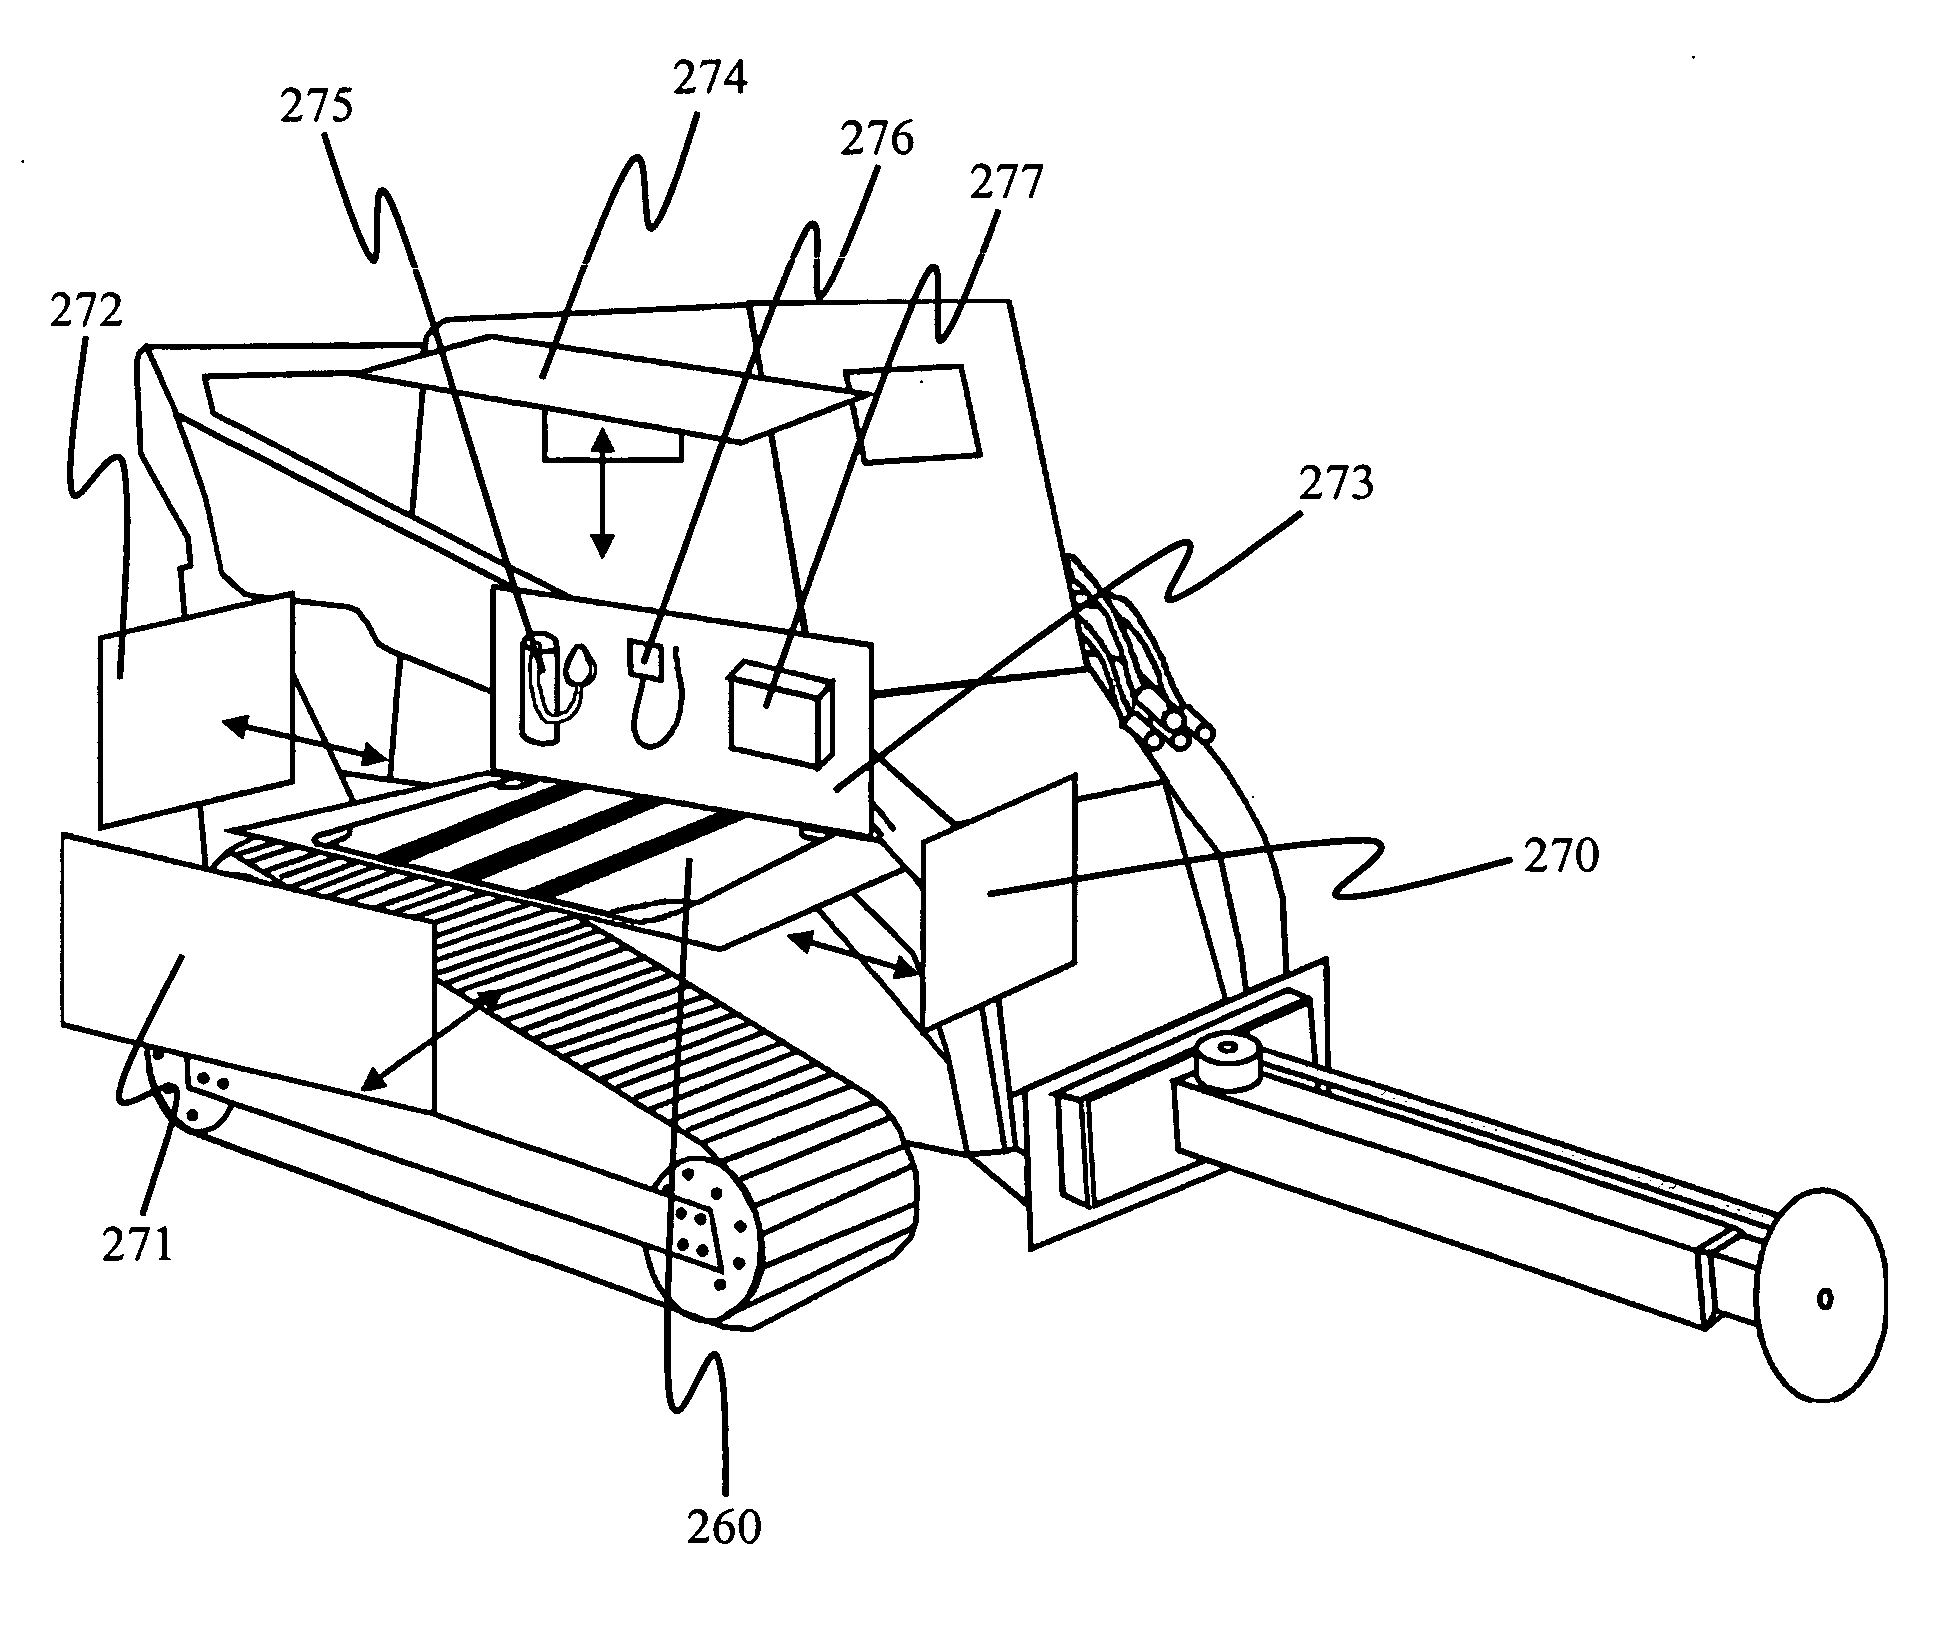 Armored tactical vehicle with modular apparatus